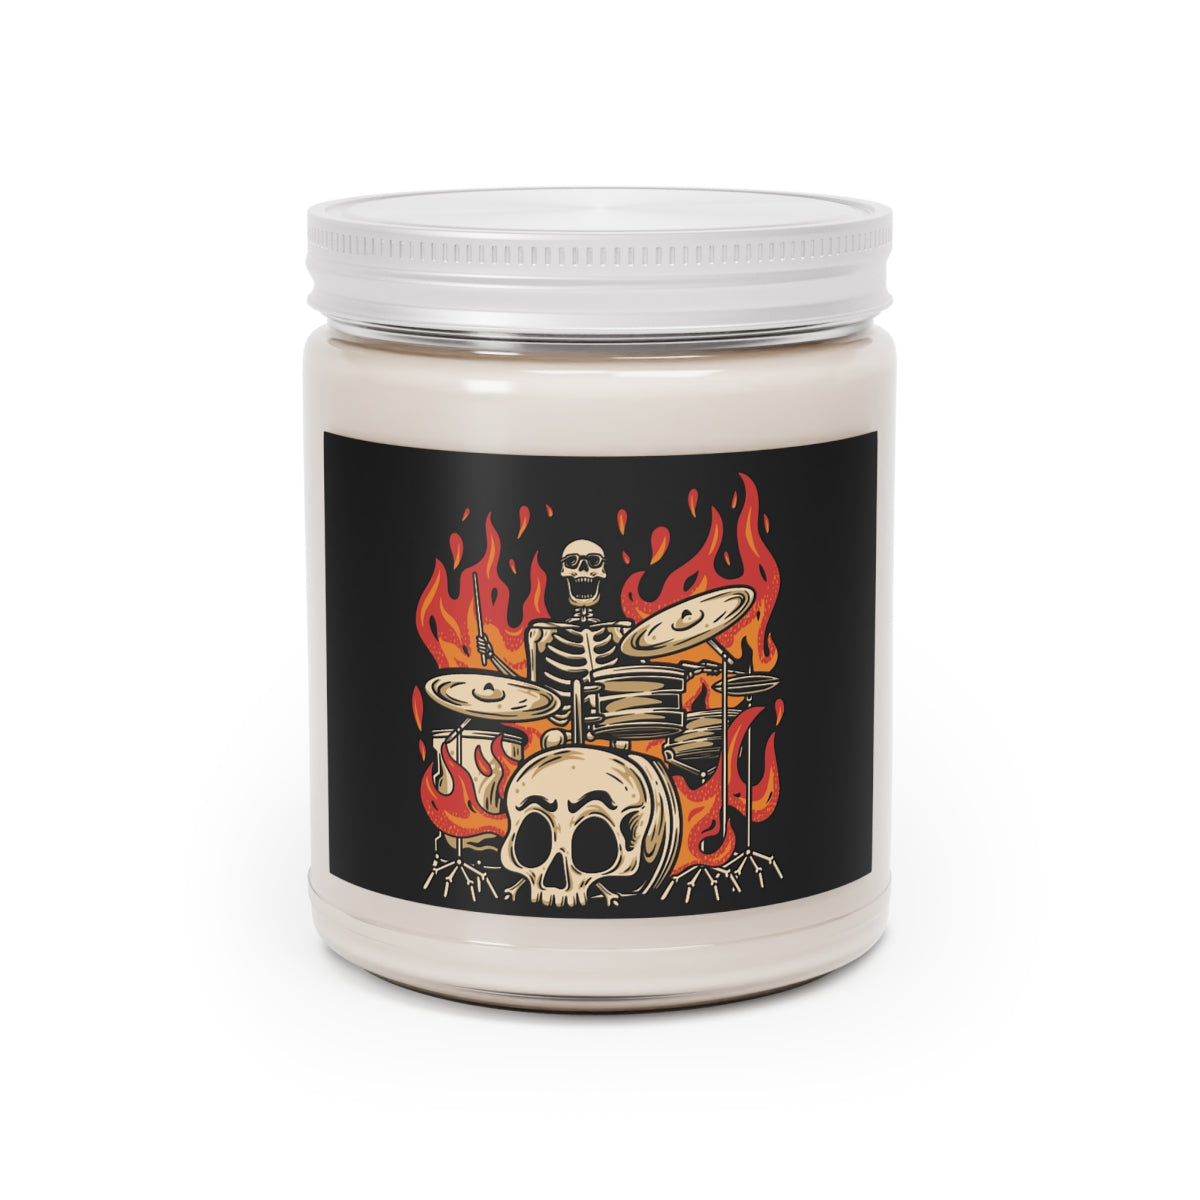 Drummer Fire Scented Candle, Skull Classic Rock Metal Band Handmade Aromatherapy Gothic Skeleton Soy Wax Men Gift Present Starcove Fashion